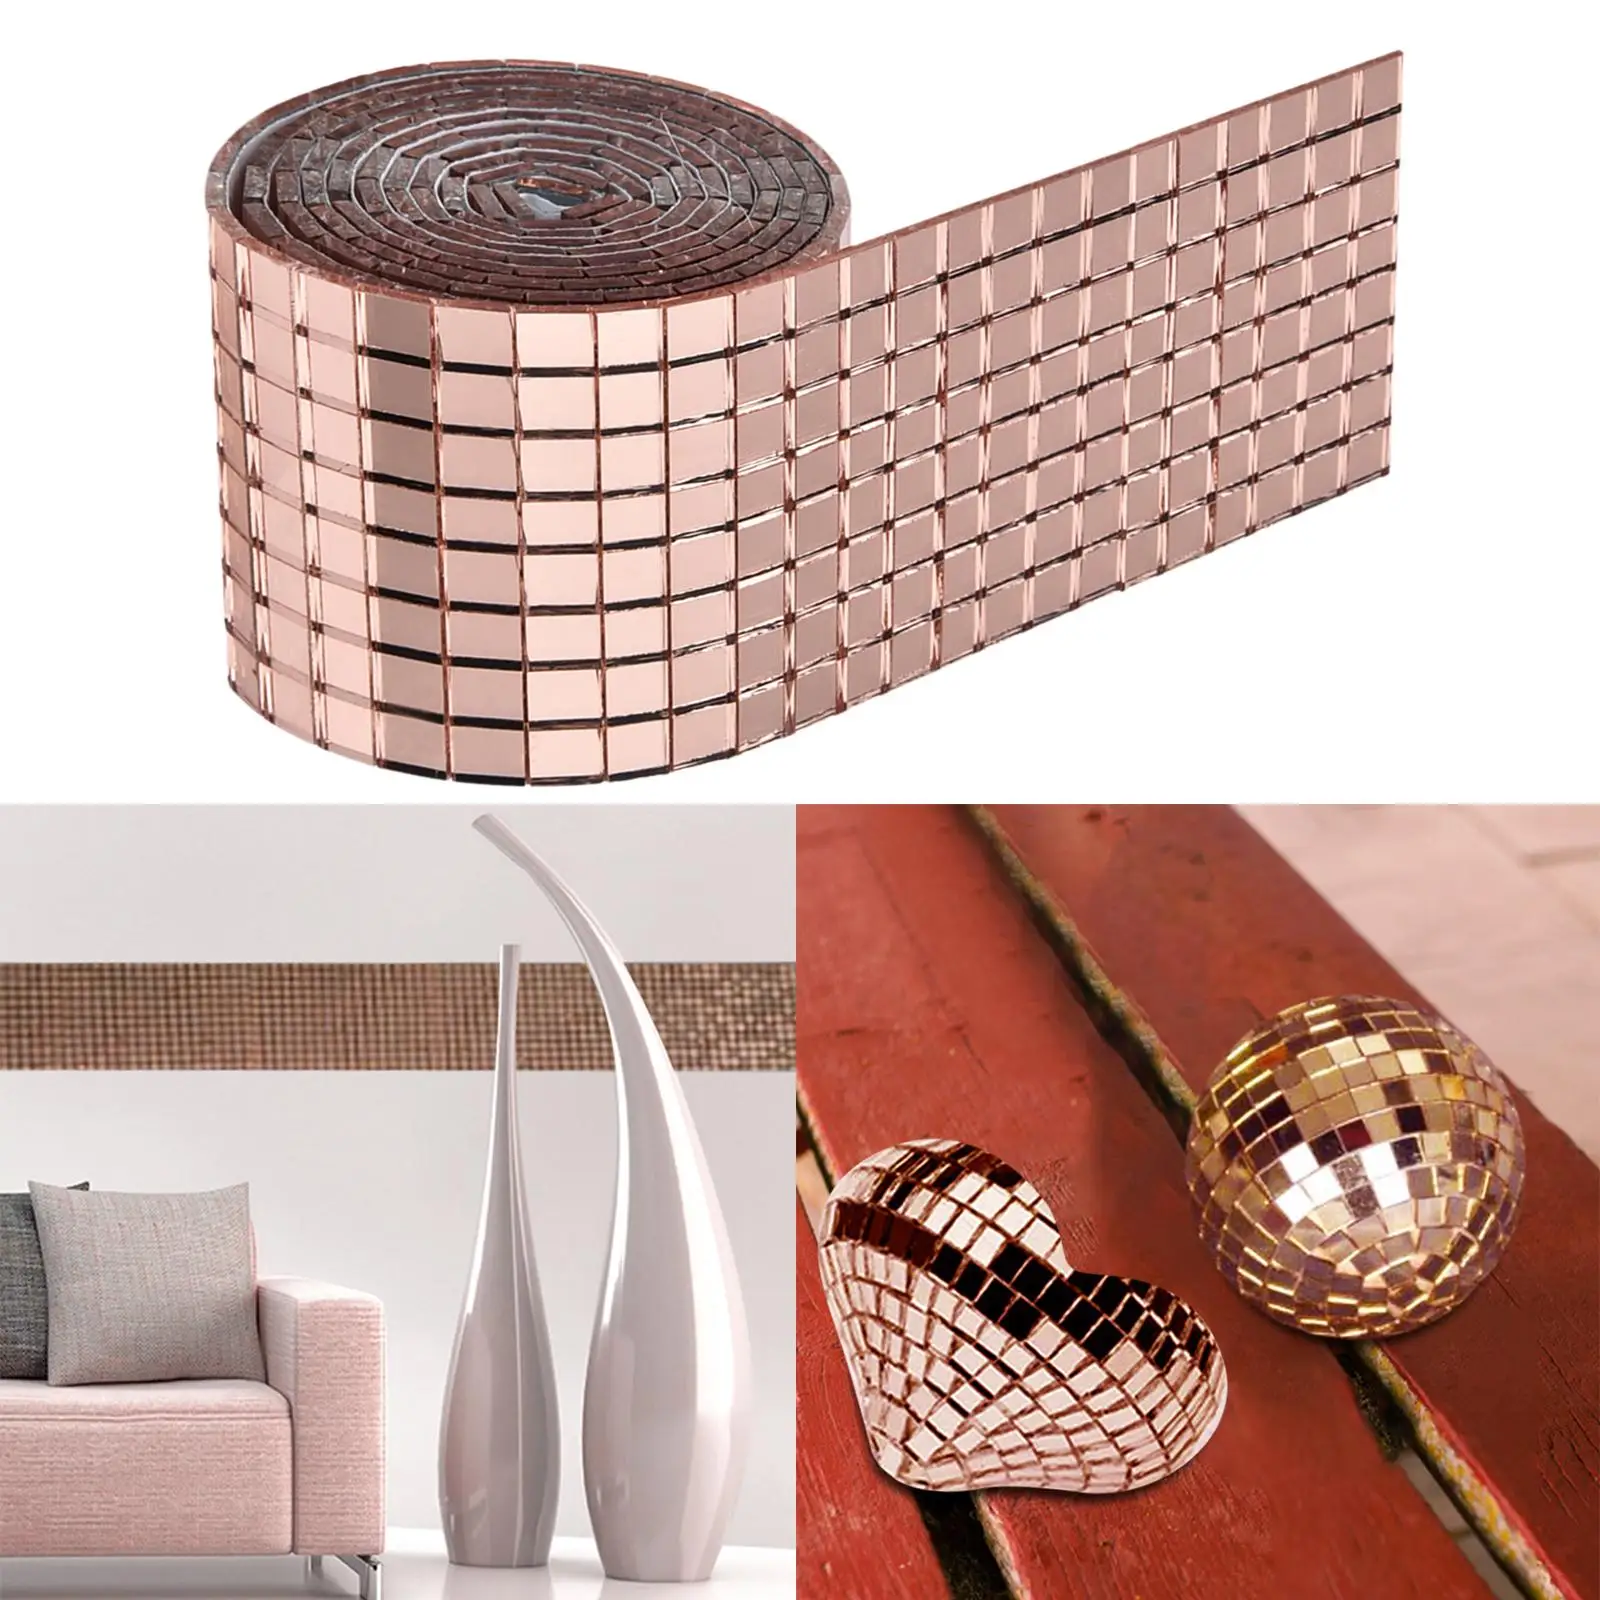 1600x Mini Square Glass Mosaic Tiles Self adhesives Craft Decorative Rose Gold for Bathroom Entertainment Venues Party